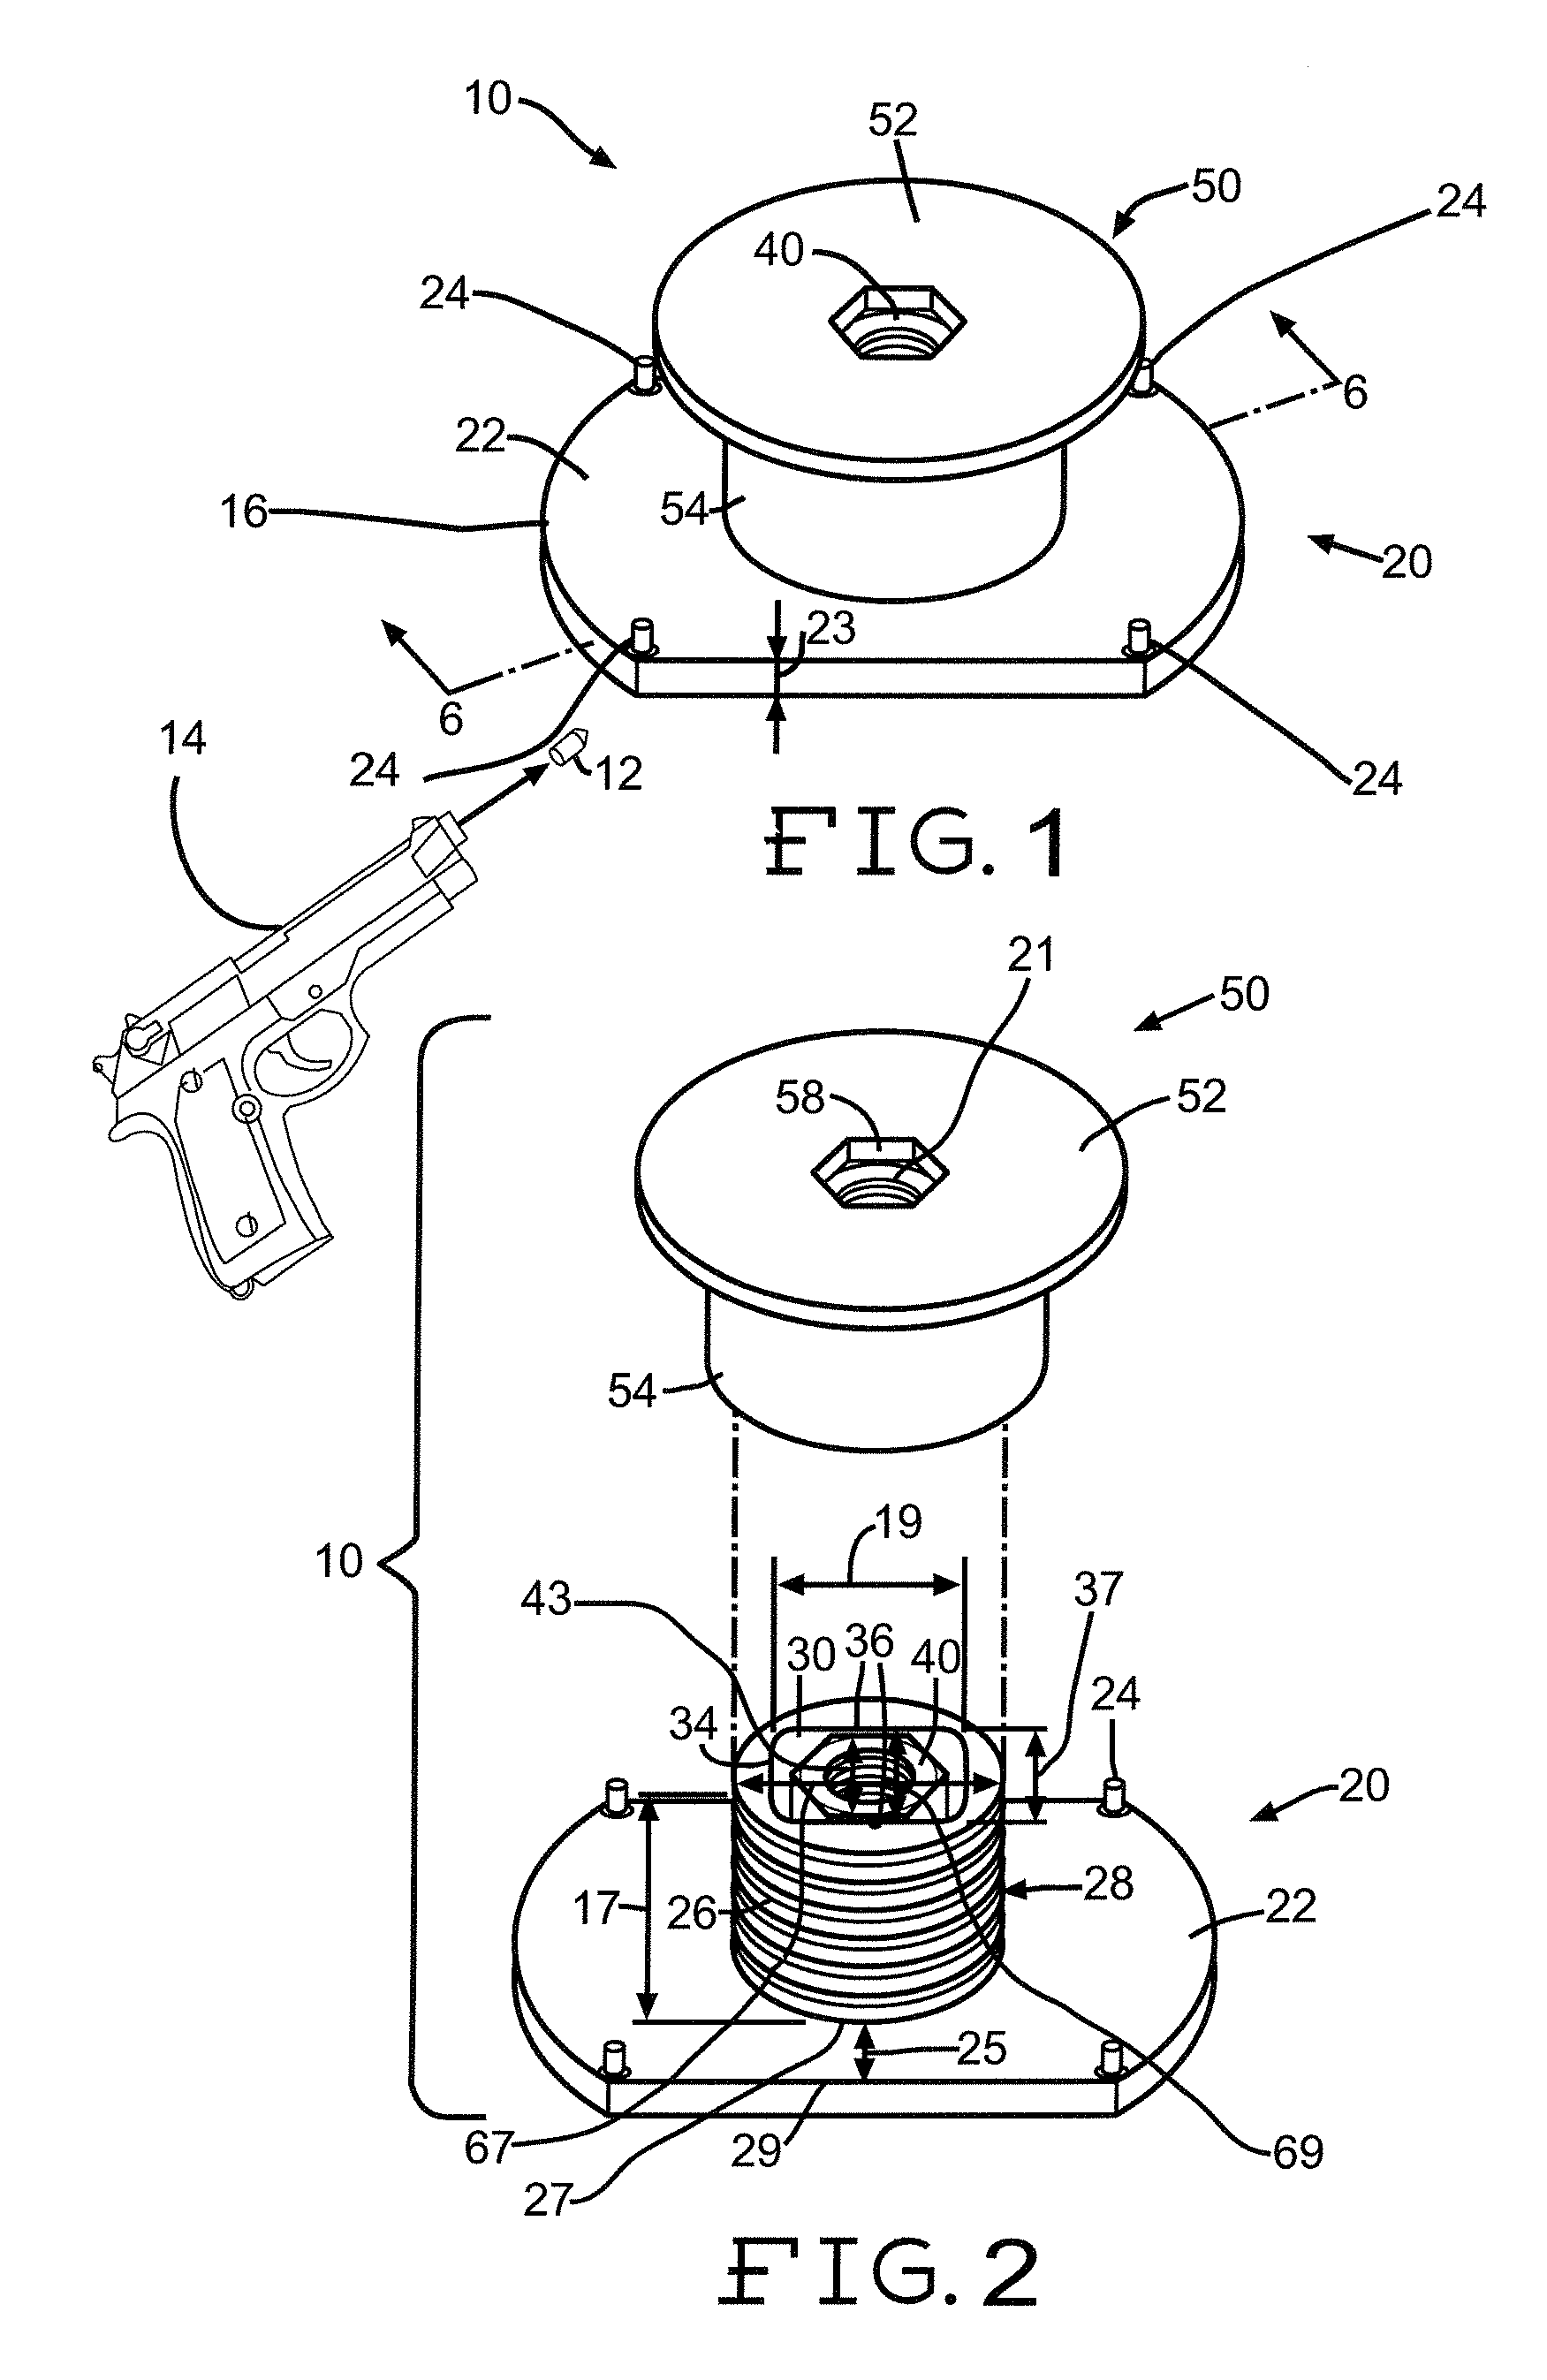 Ballistic resistant through insert with floating capability for stopping a ballistic projectile